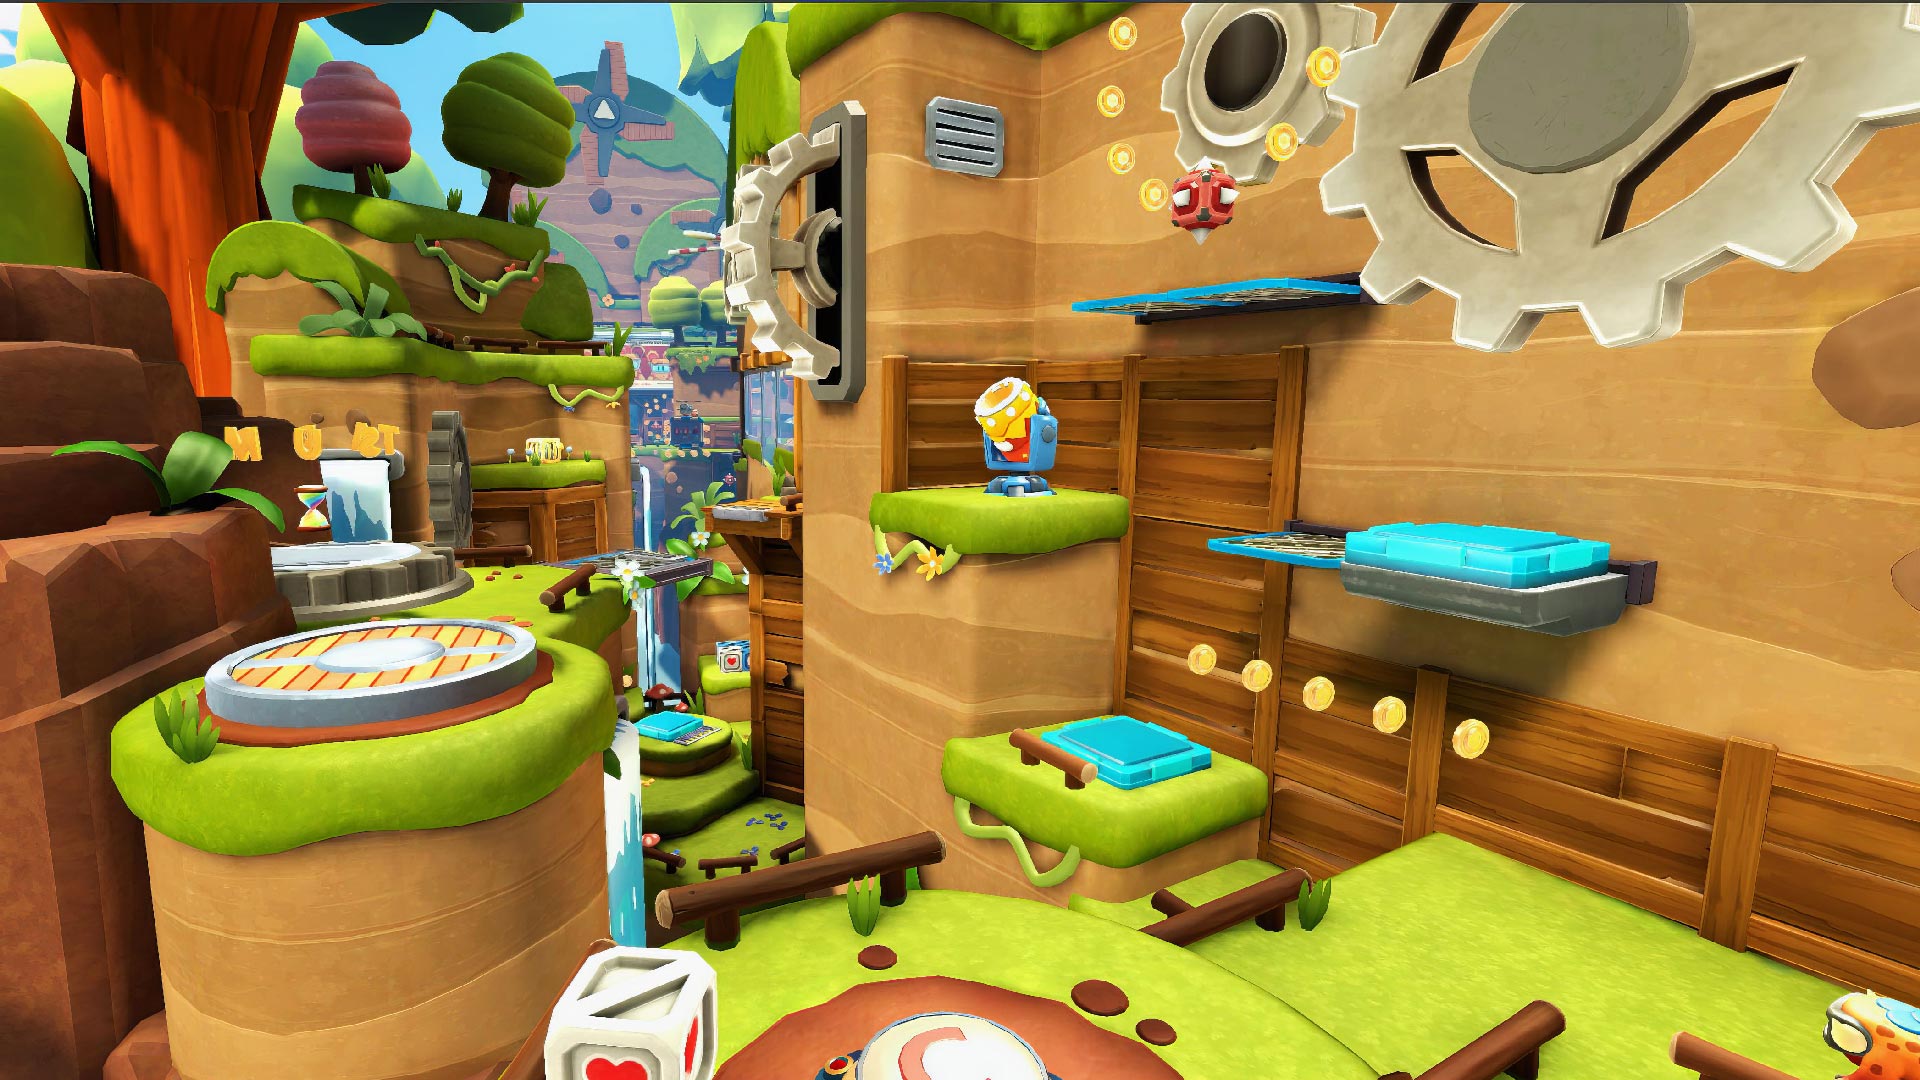 ‘Max Mustard’ Review – An ‘Astro Bot’ Style VR Platformer That Cuts the Mustard